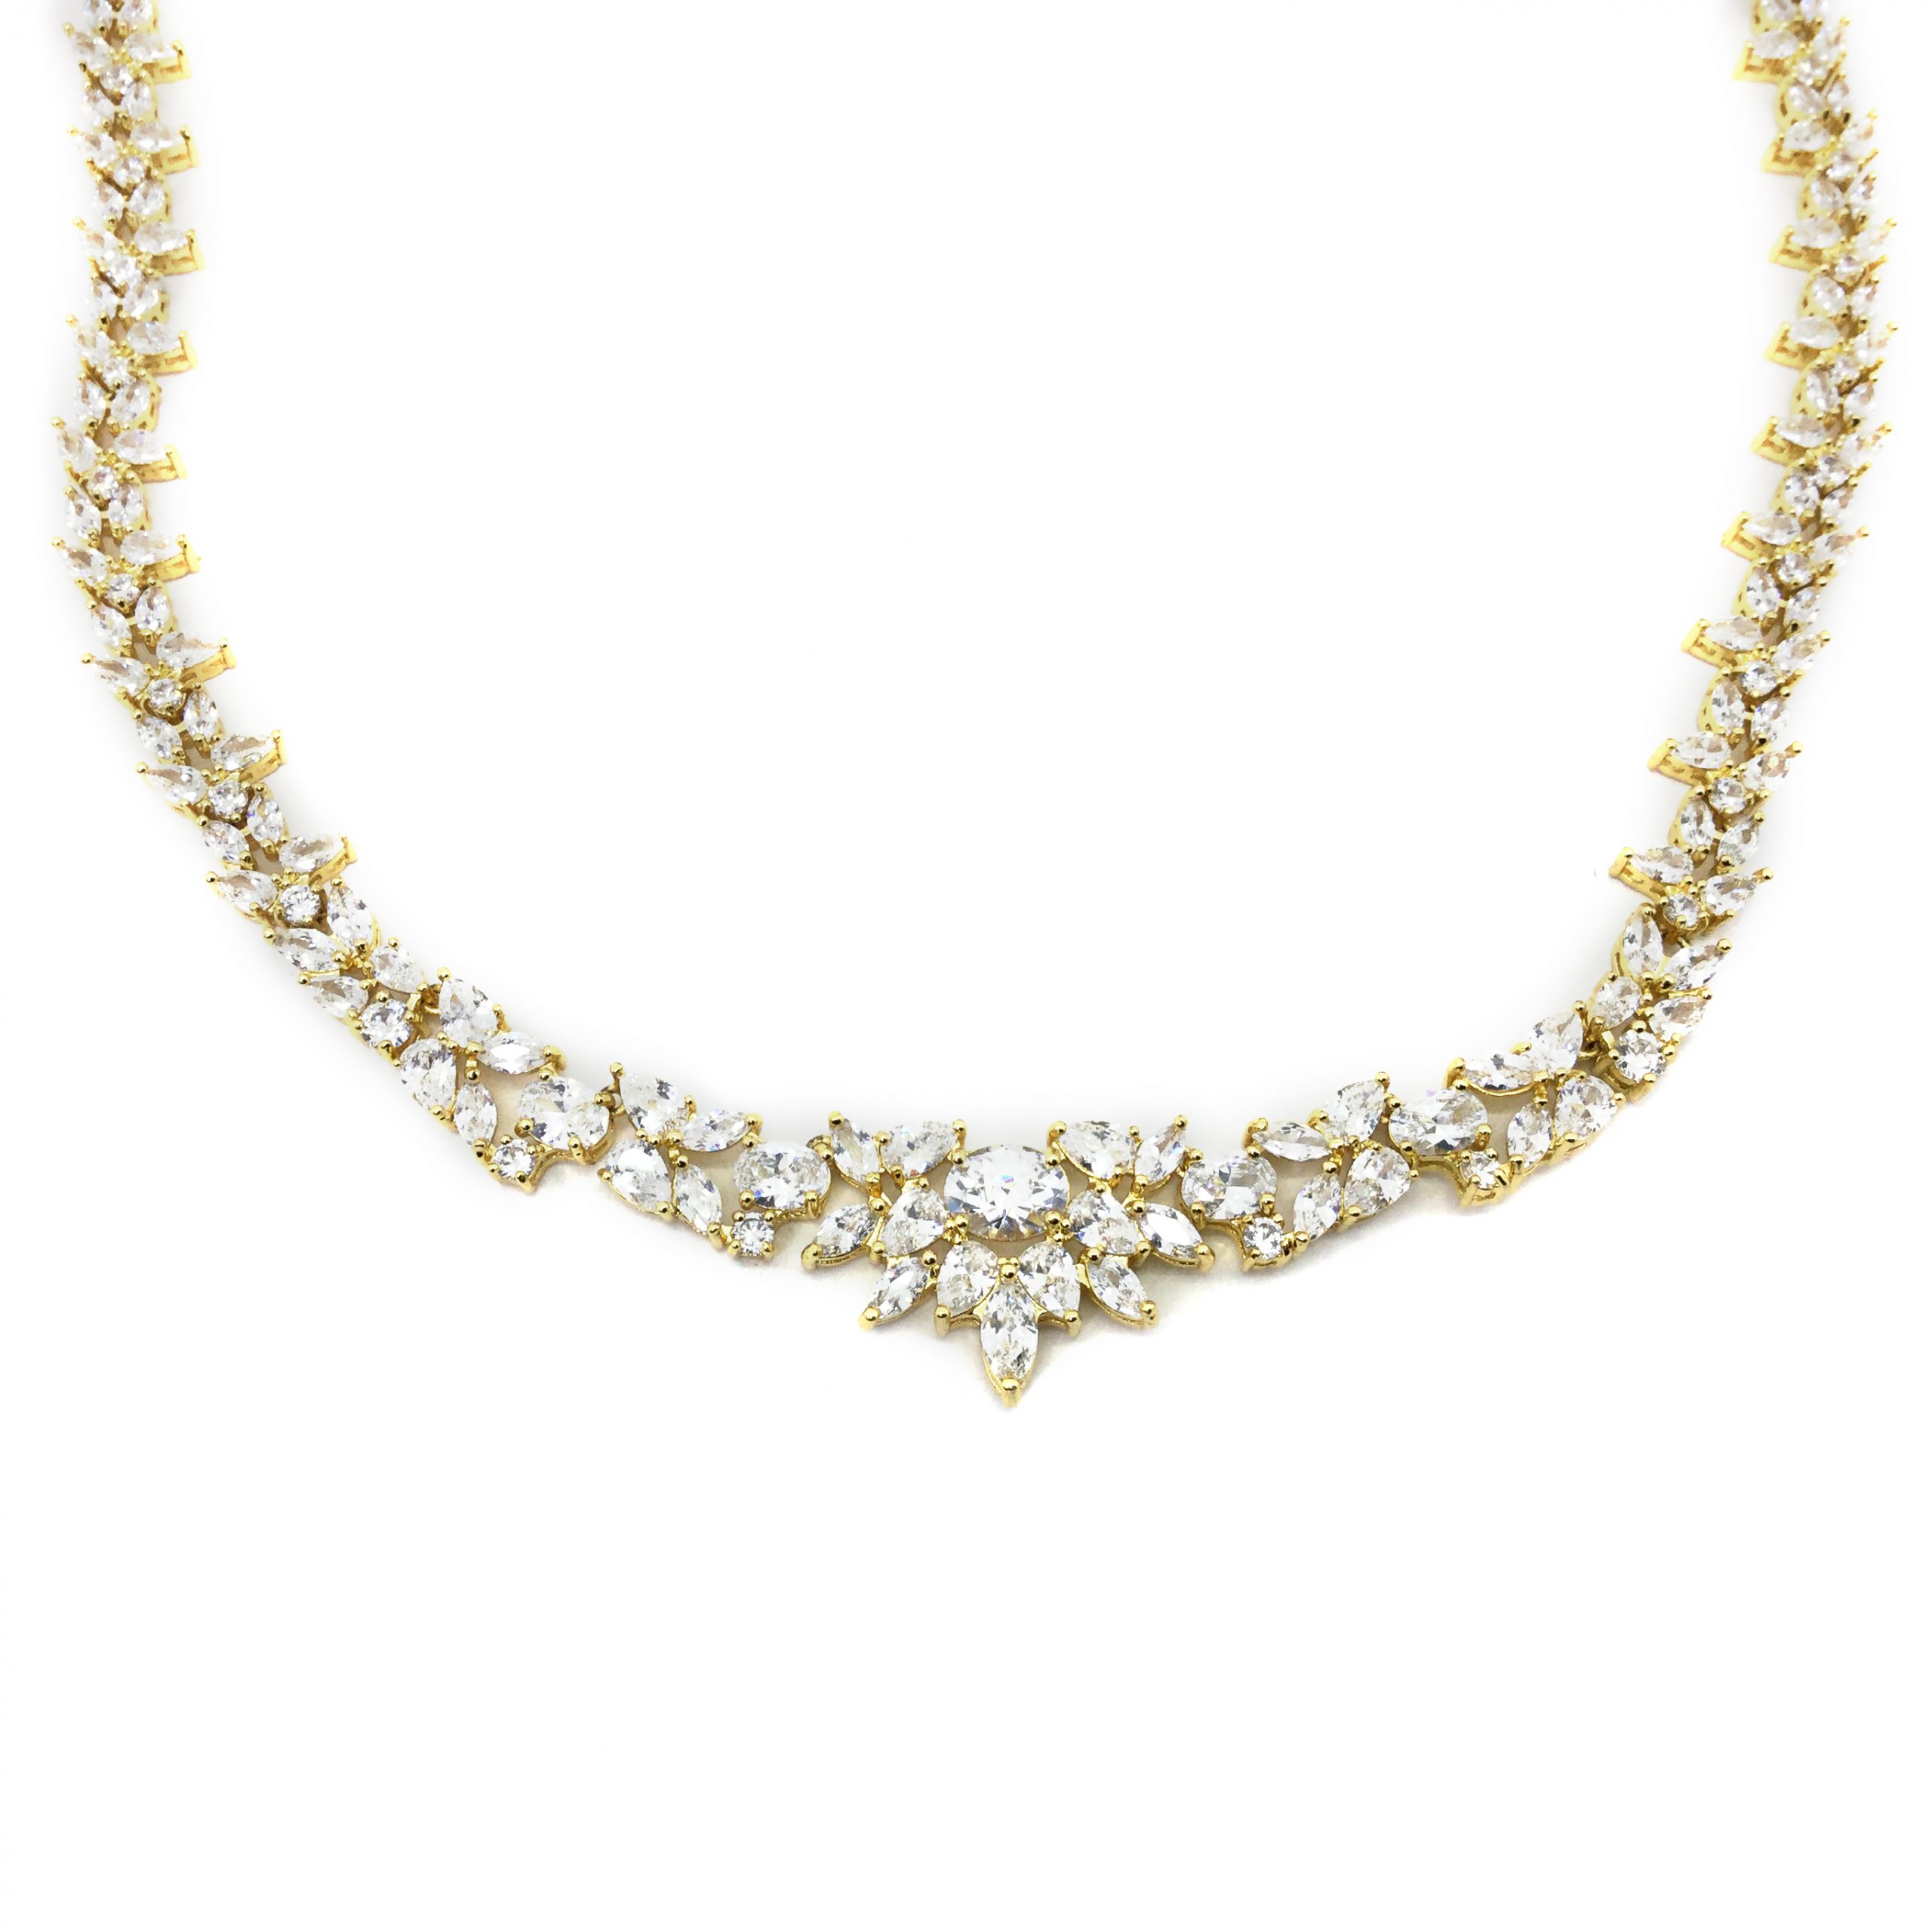 gold necklace for marriage| Aulora I Jeanette Maree|Shop online now